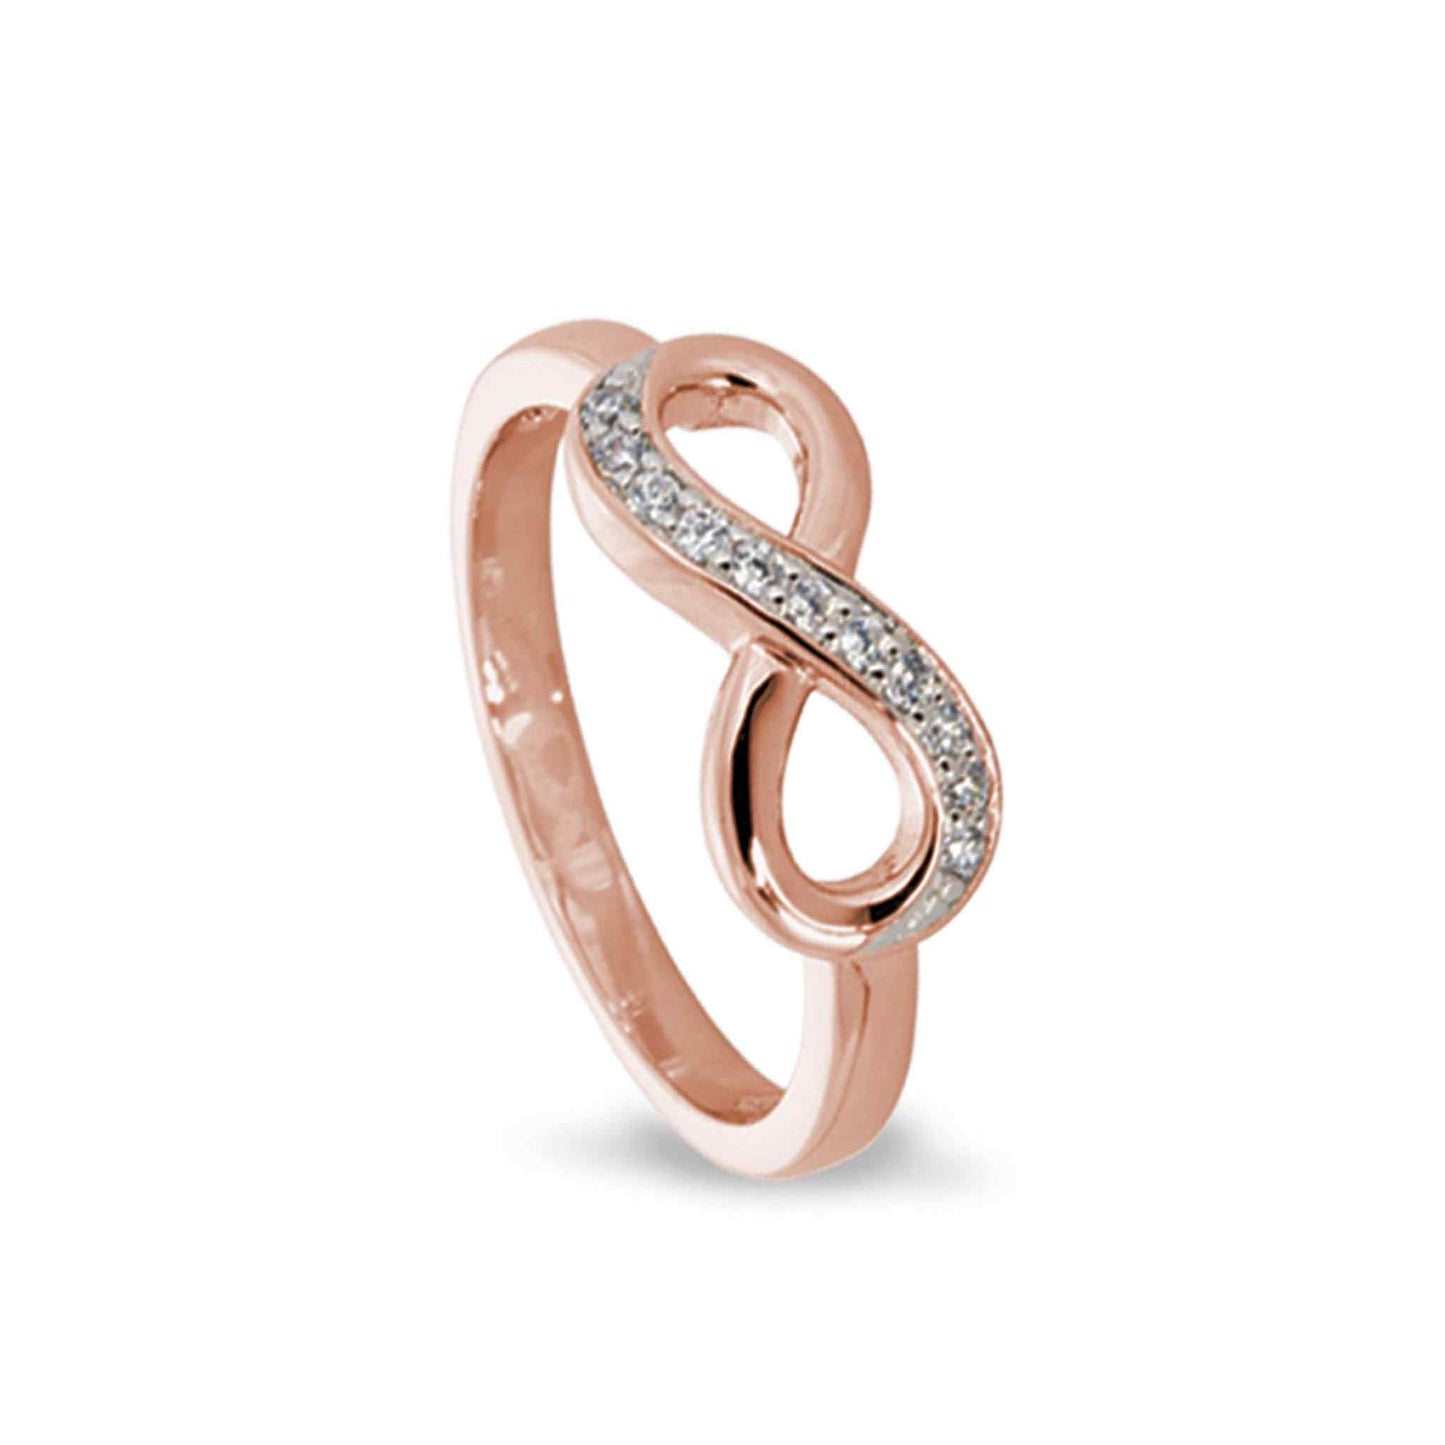 A infinity ring with simulated diamonds displayed on a neutral white background.